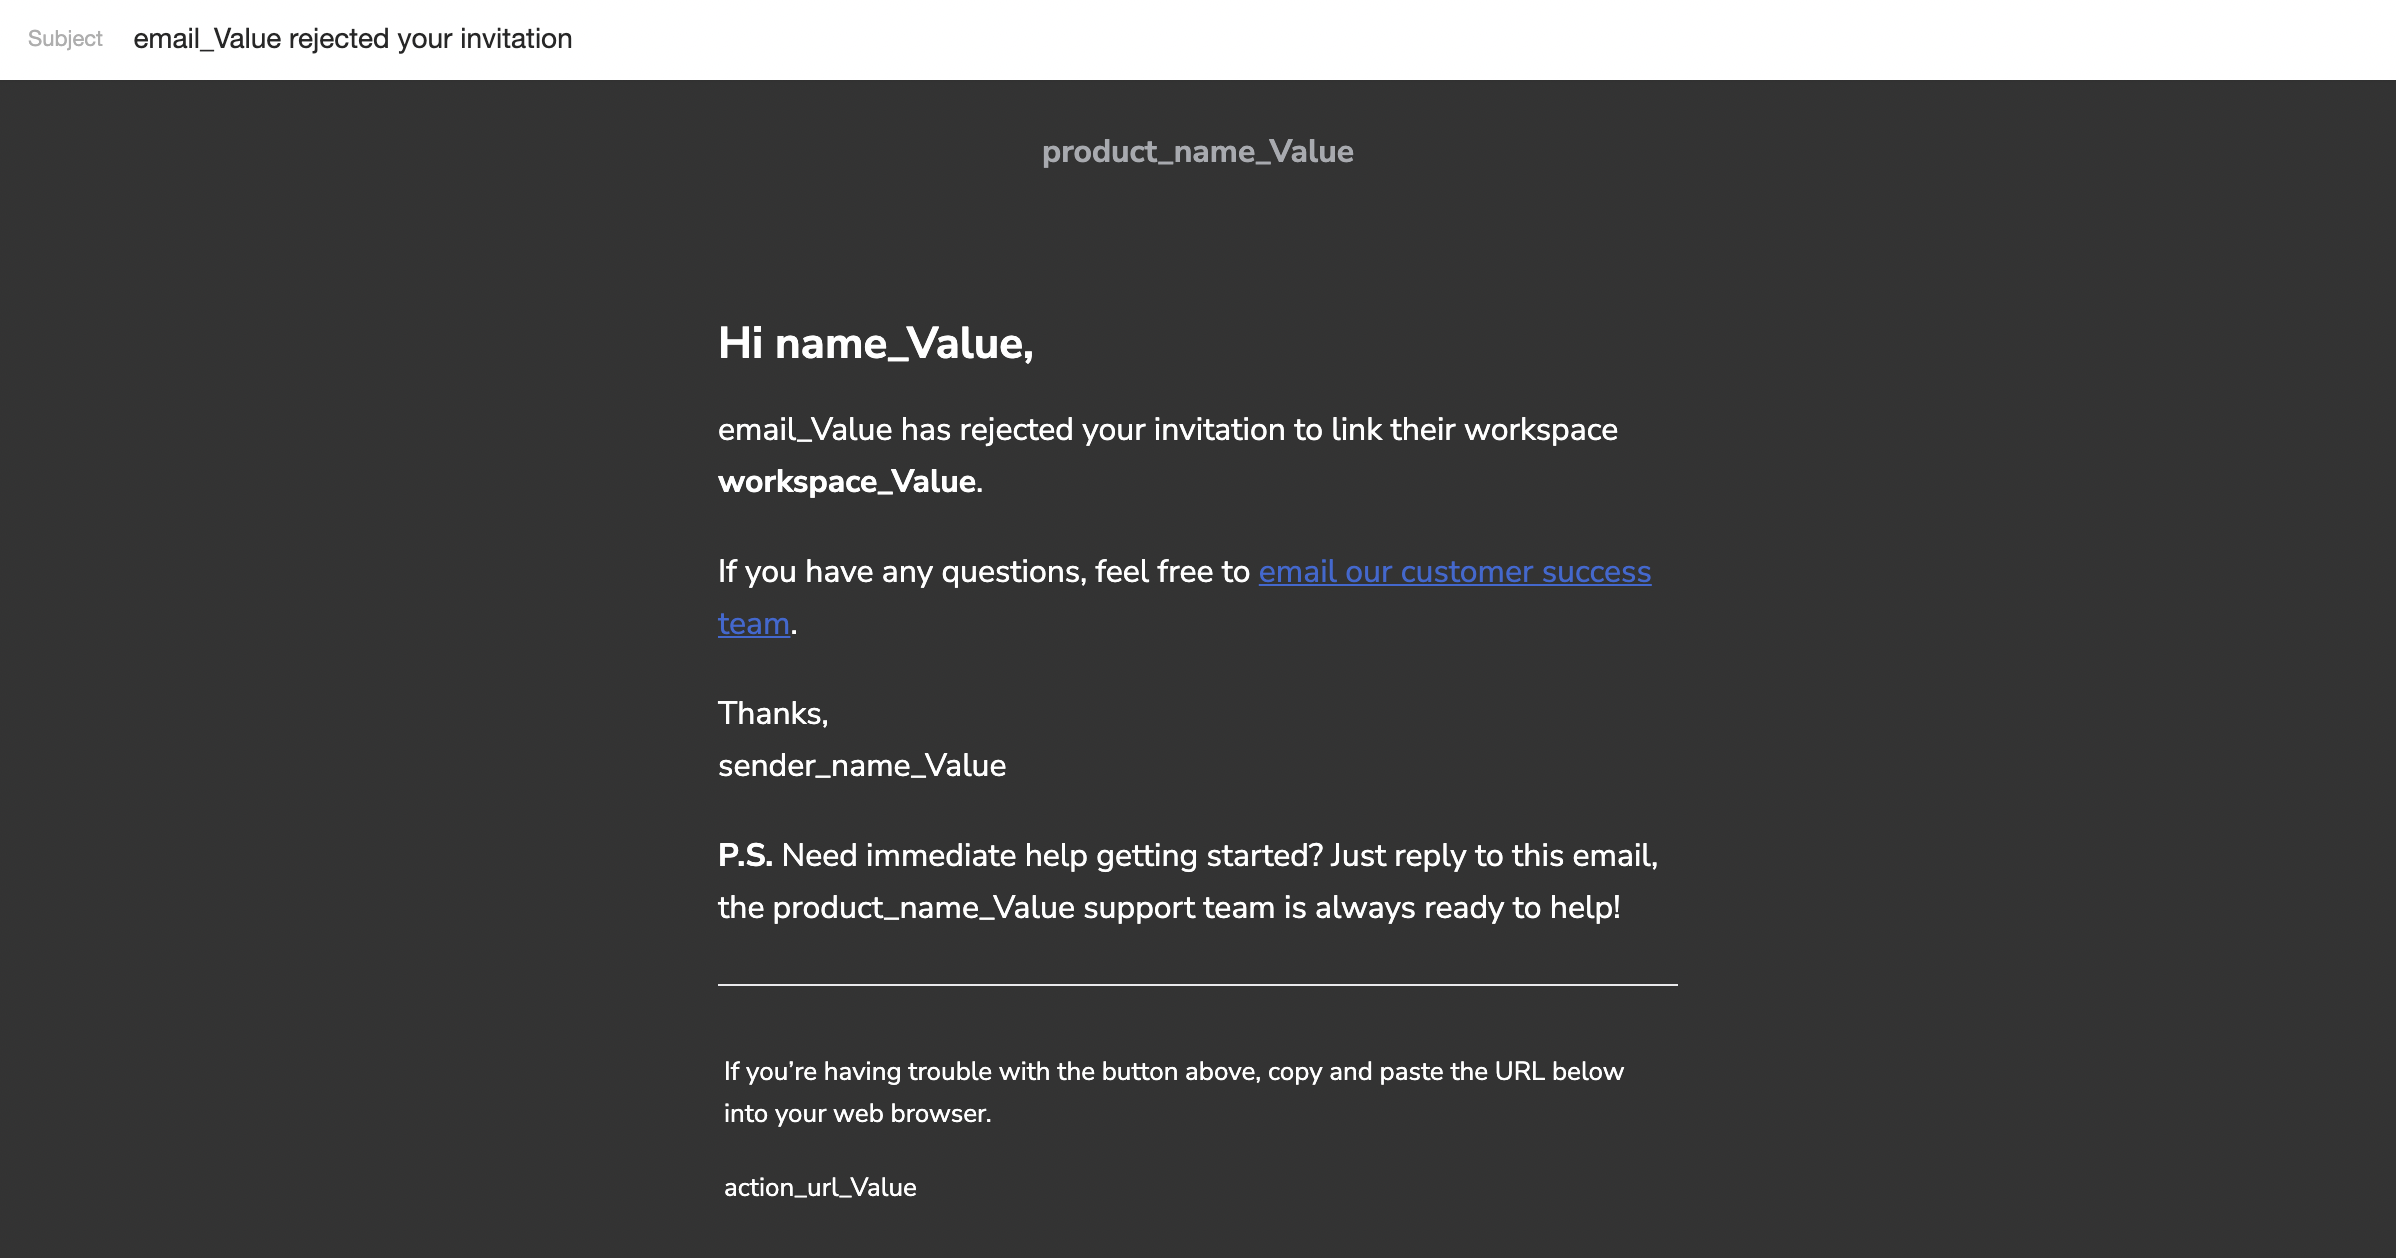 Link Invitation Rejected - Postmark email template